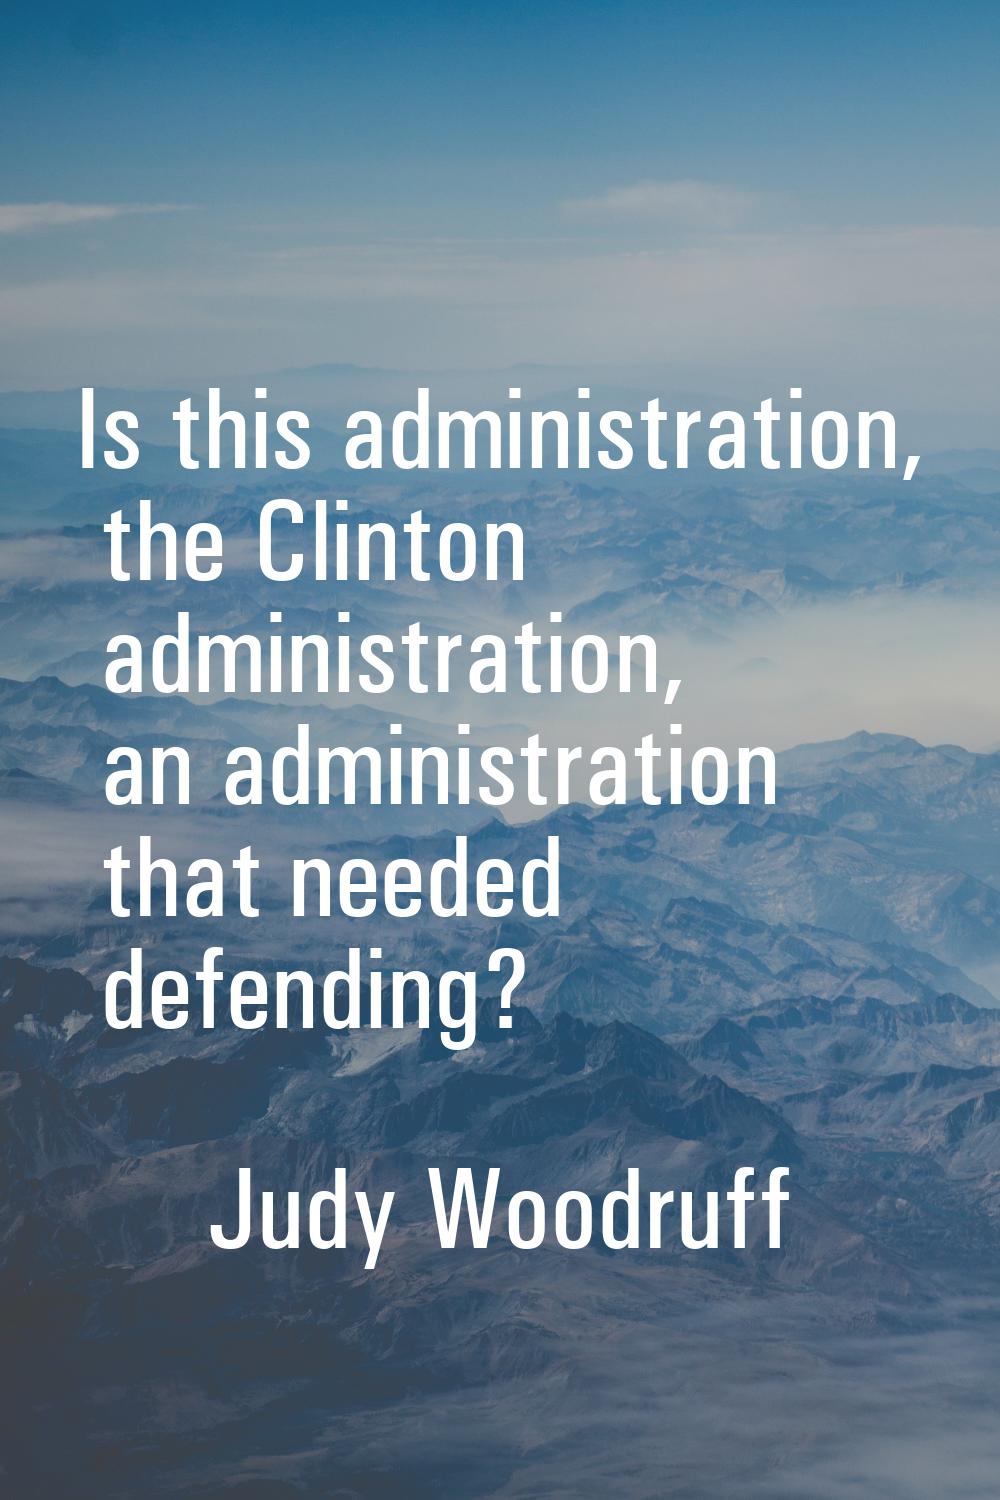 Is this administration, the Clinton administration, an administration that needed defending?